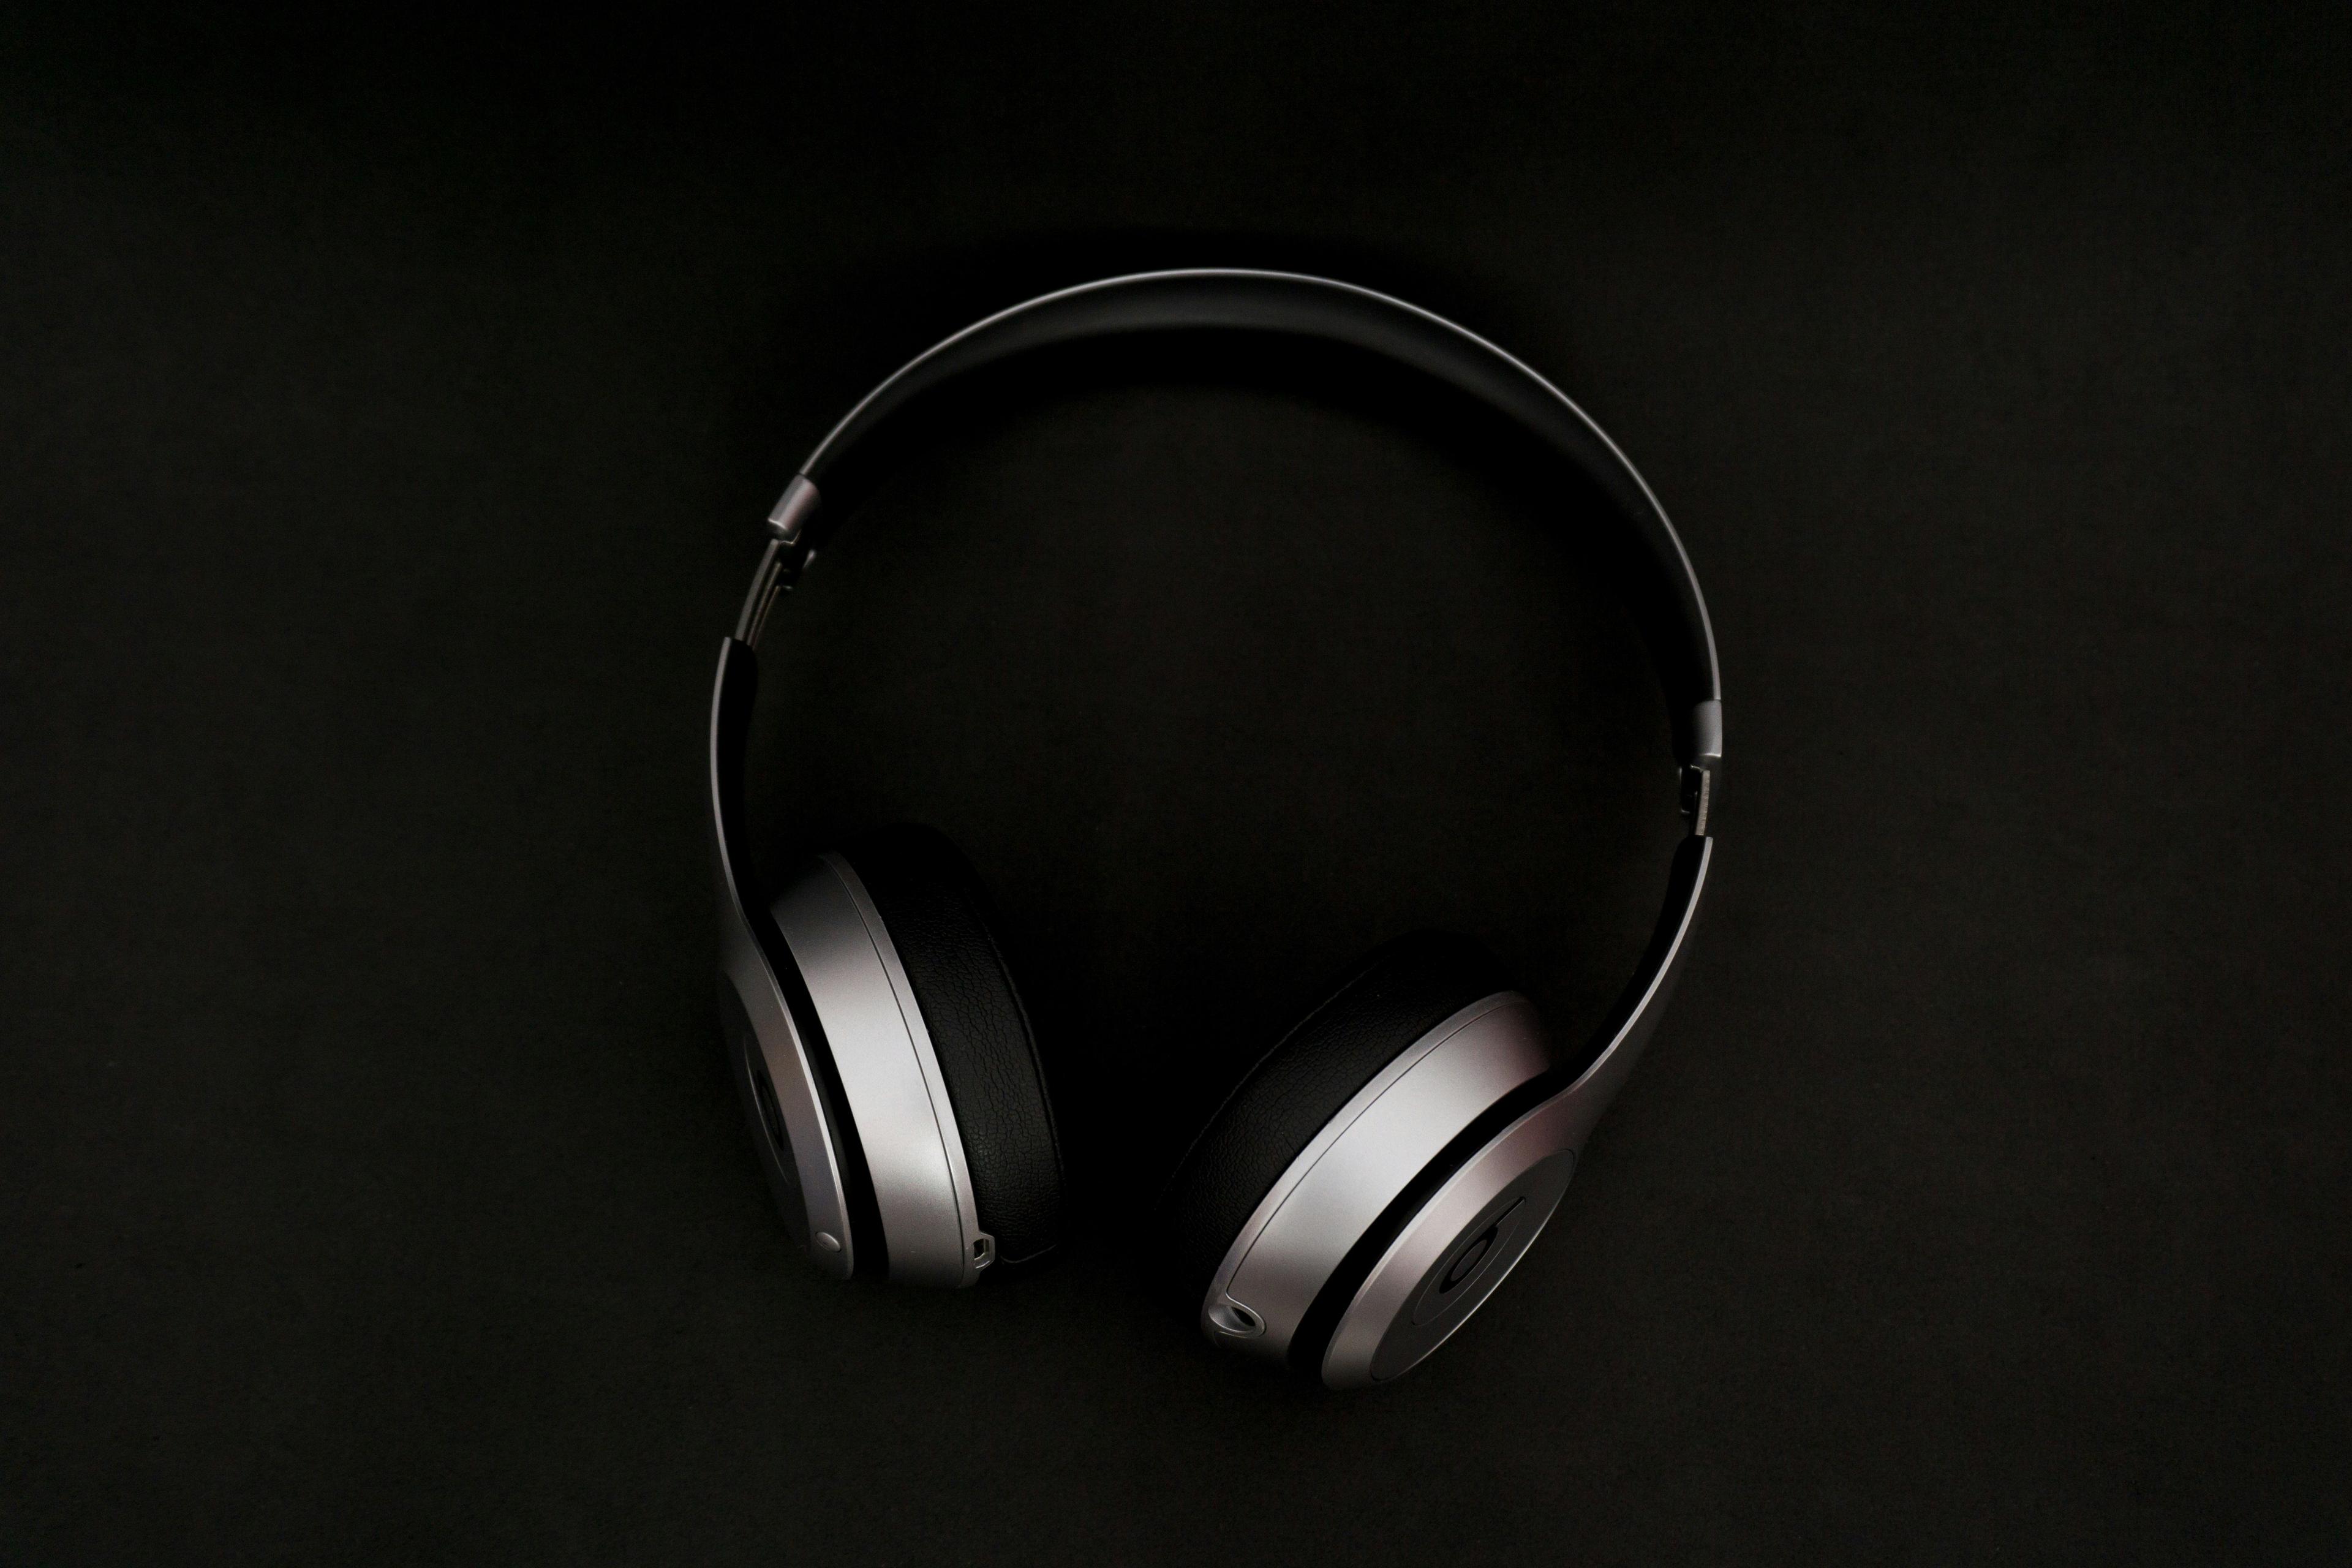 Feel the deep bass with BassBoom 500. These wireless on-ear headphones deliver powerful sound with enhanced low frequencies. The foldable design and soft ear cushions provide comfort and portability. With Bluetooth connectivity and a built-in microphone, you can enjoy wireless music and take calls with ease.